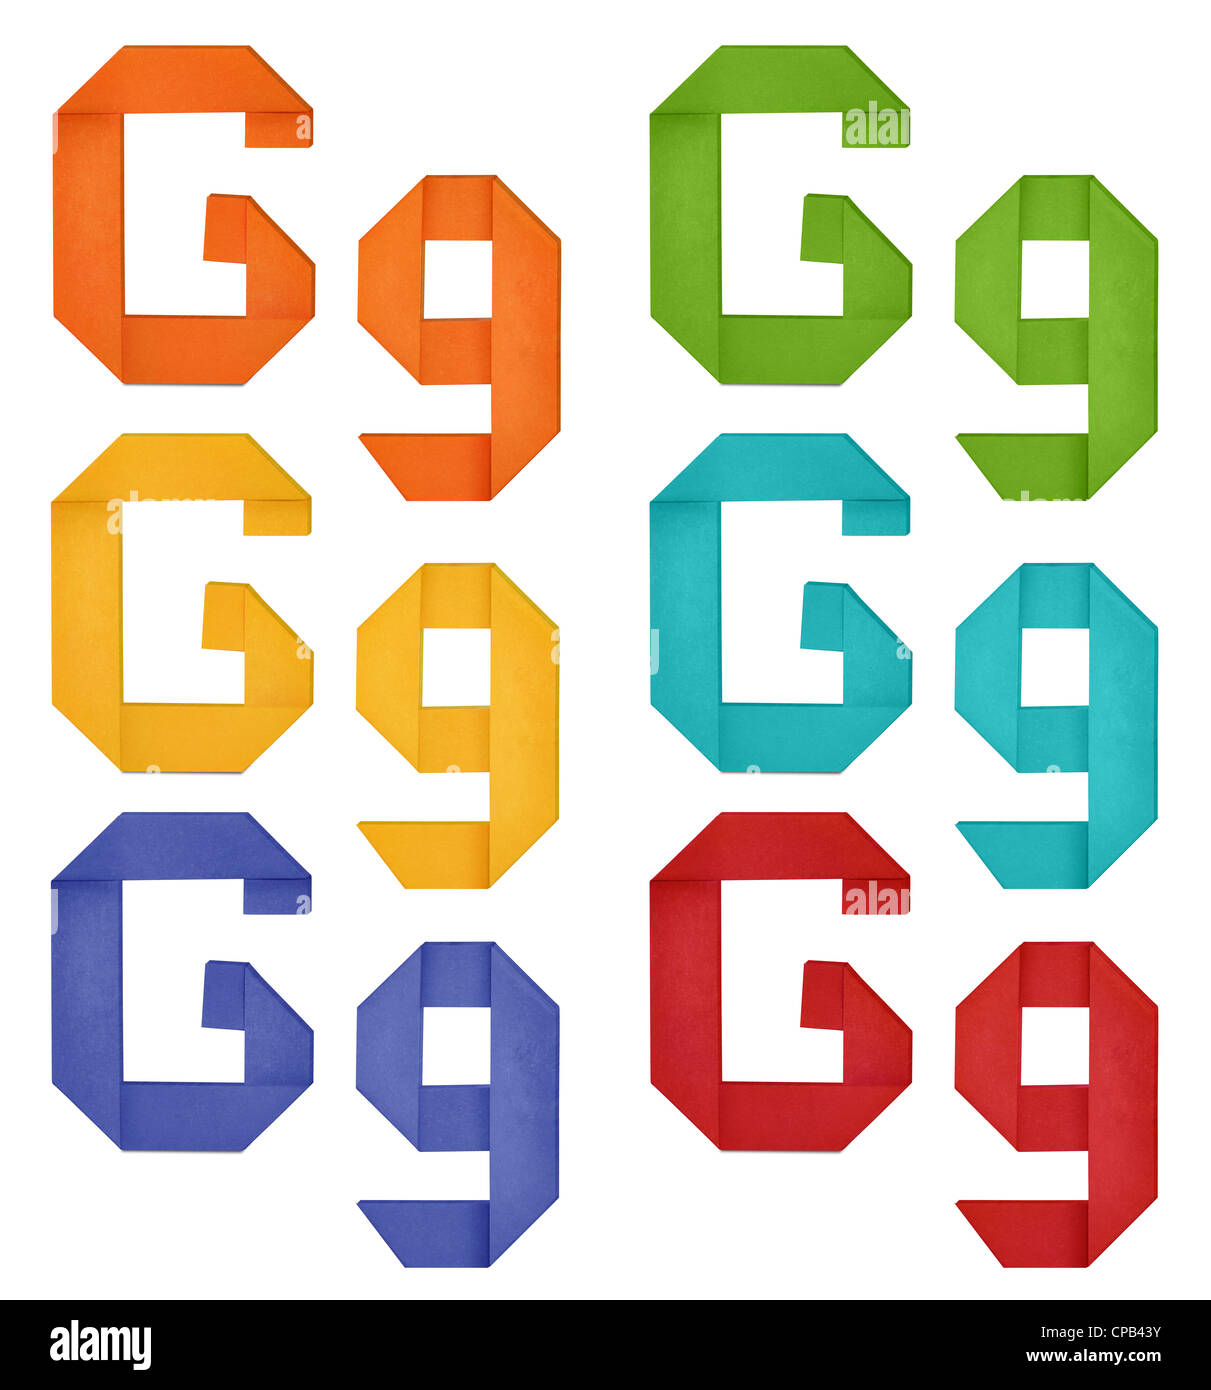 Set of capital letter and lowercase letter 'G' in various color. Origami alphabet letter on white background. Stock Photo